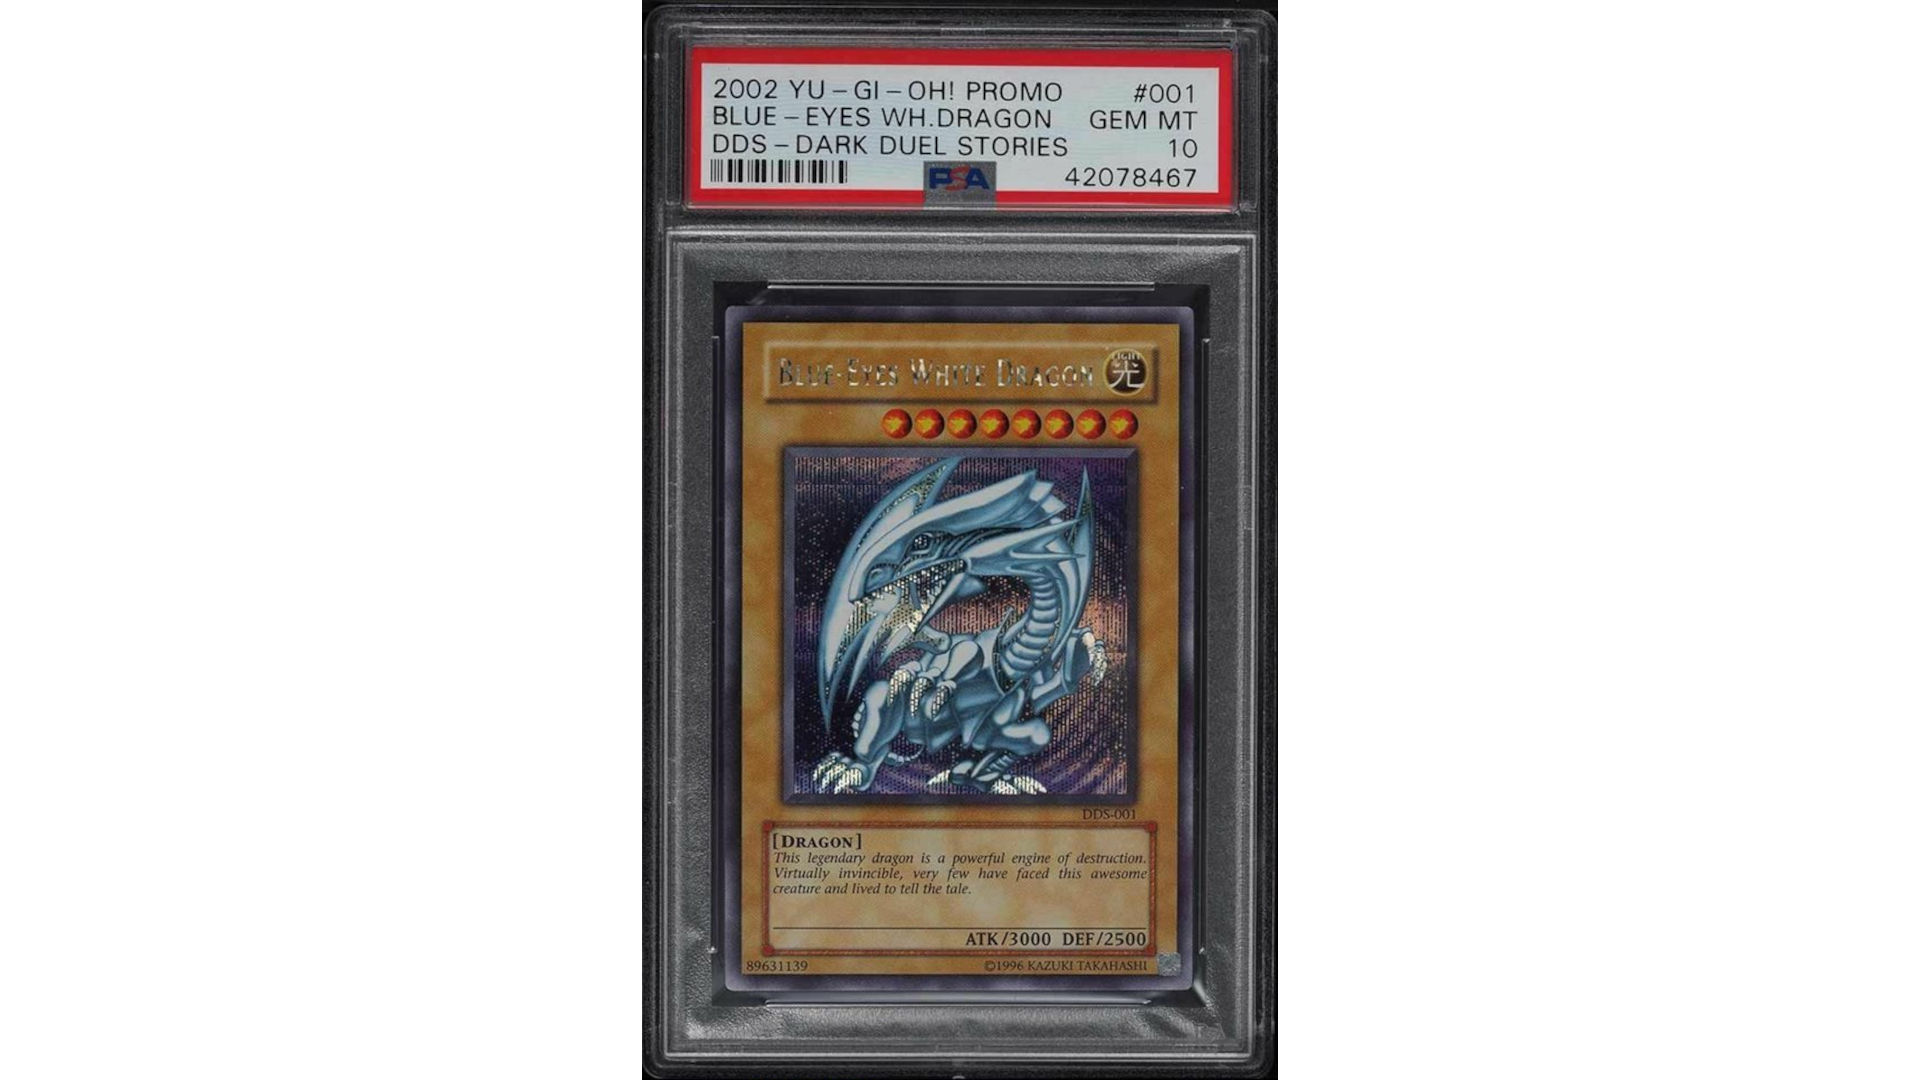 The 10 Most Expensive Yu-Gi-oh! Cards of All Time